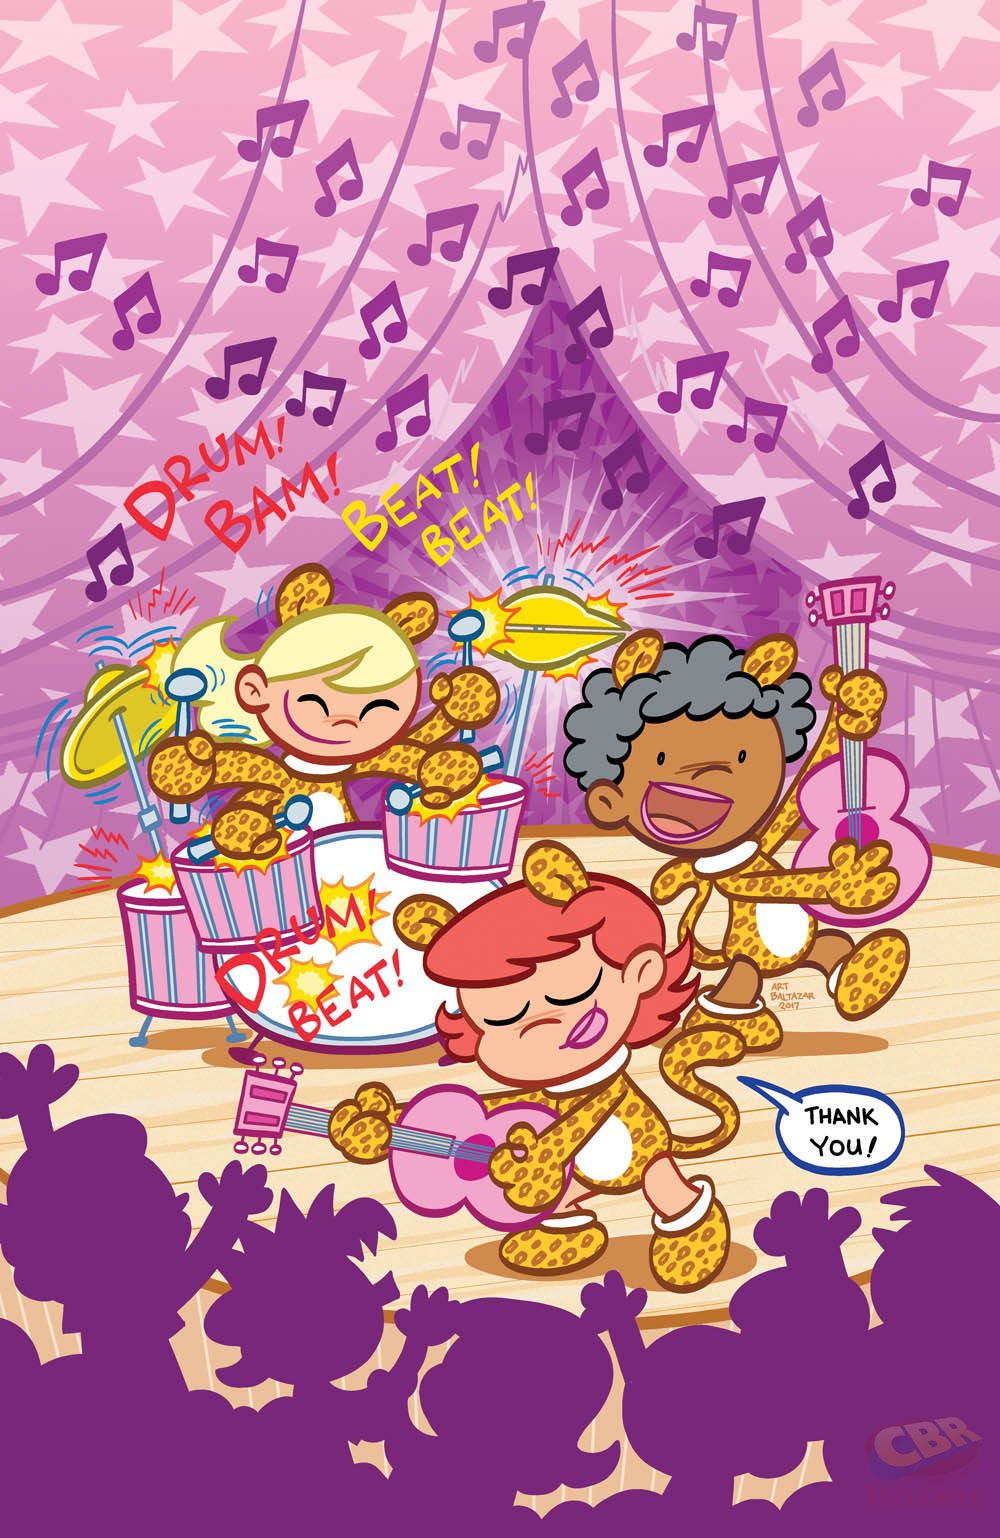 Little Josie and The Pussycats cover by Art Baltazar